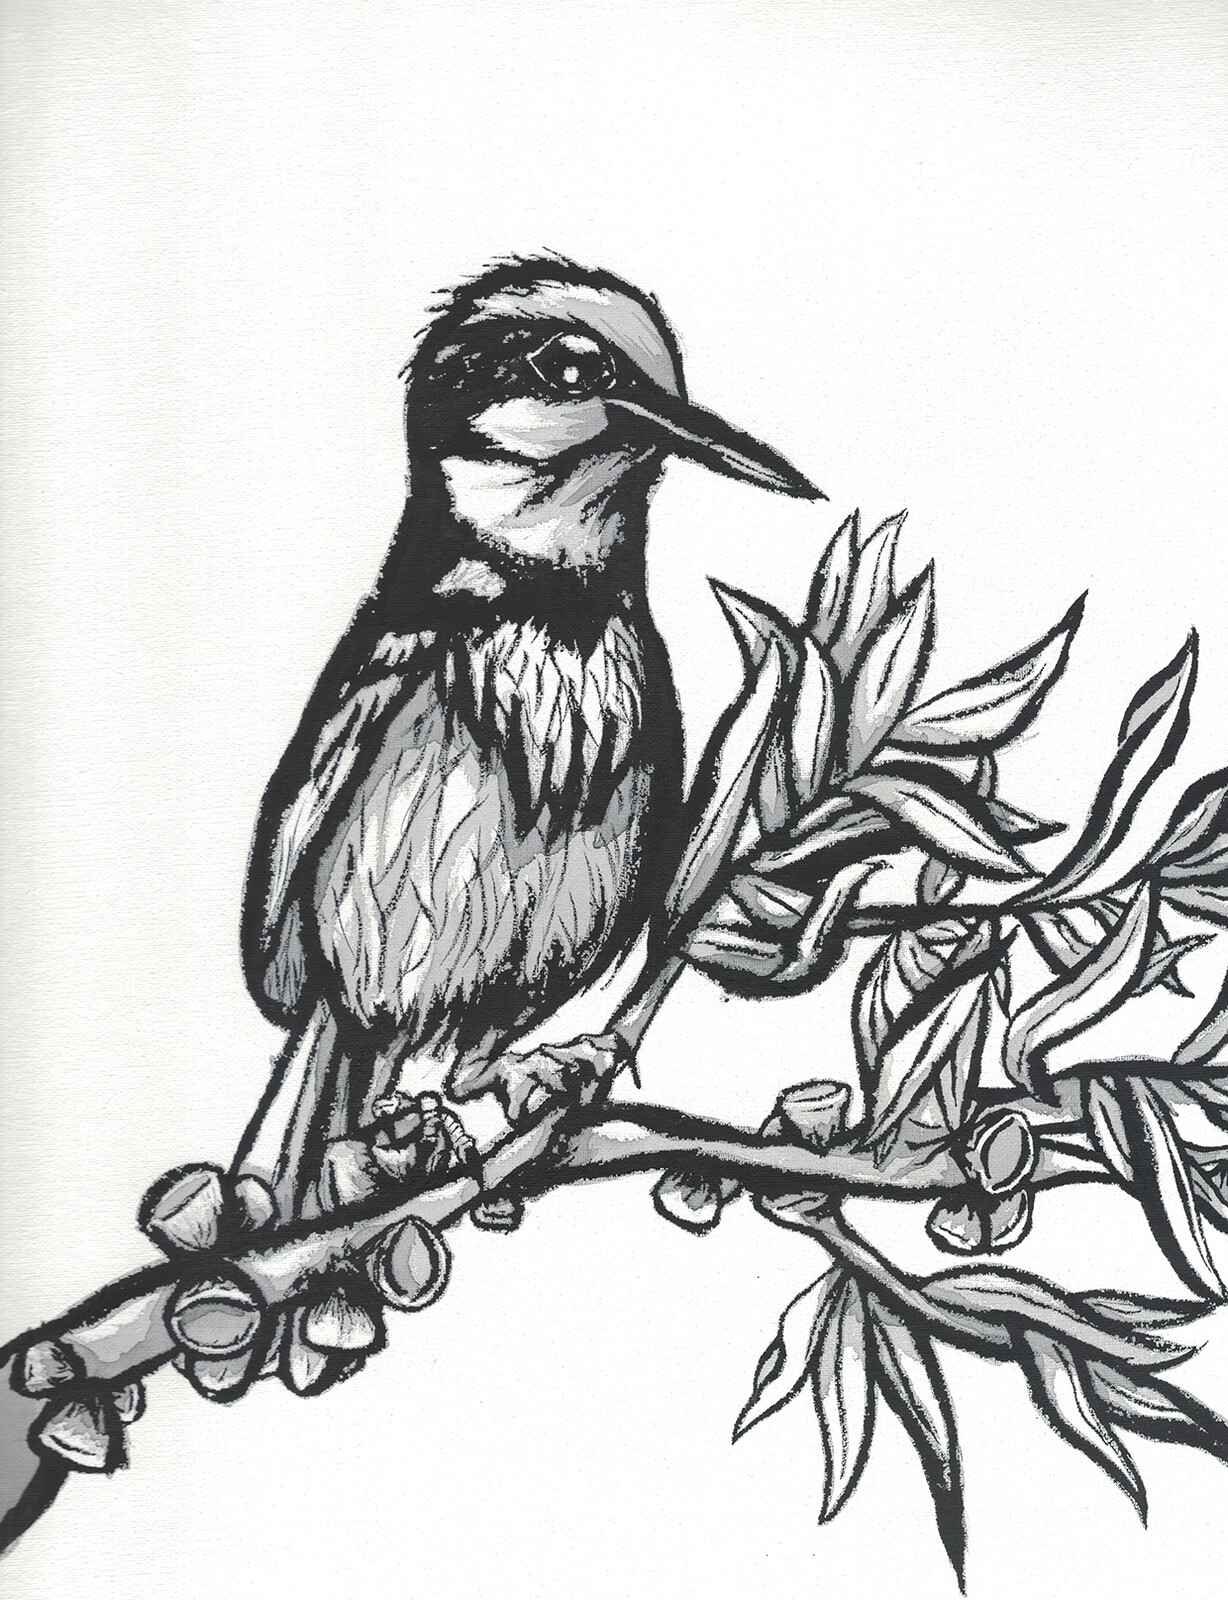 A little bird inkwashing I recently did. Due for some color splashes to help identify species.